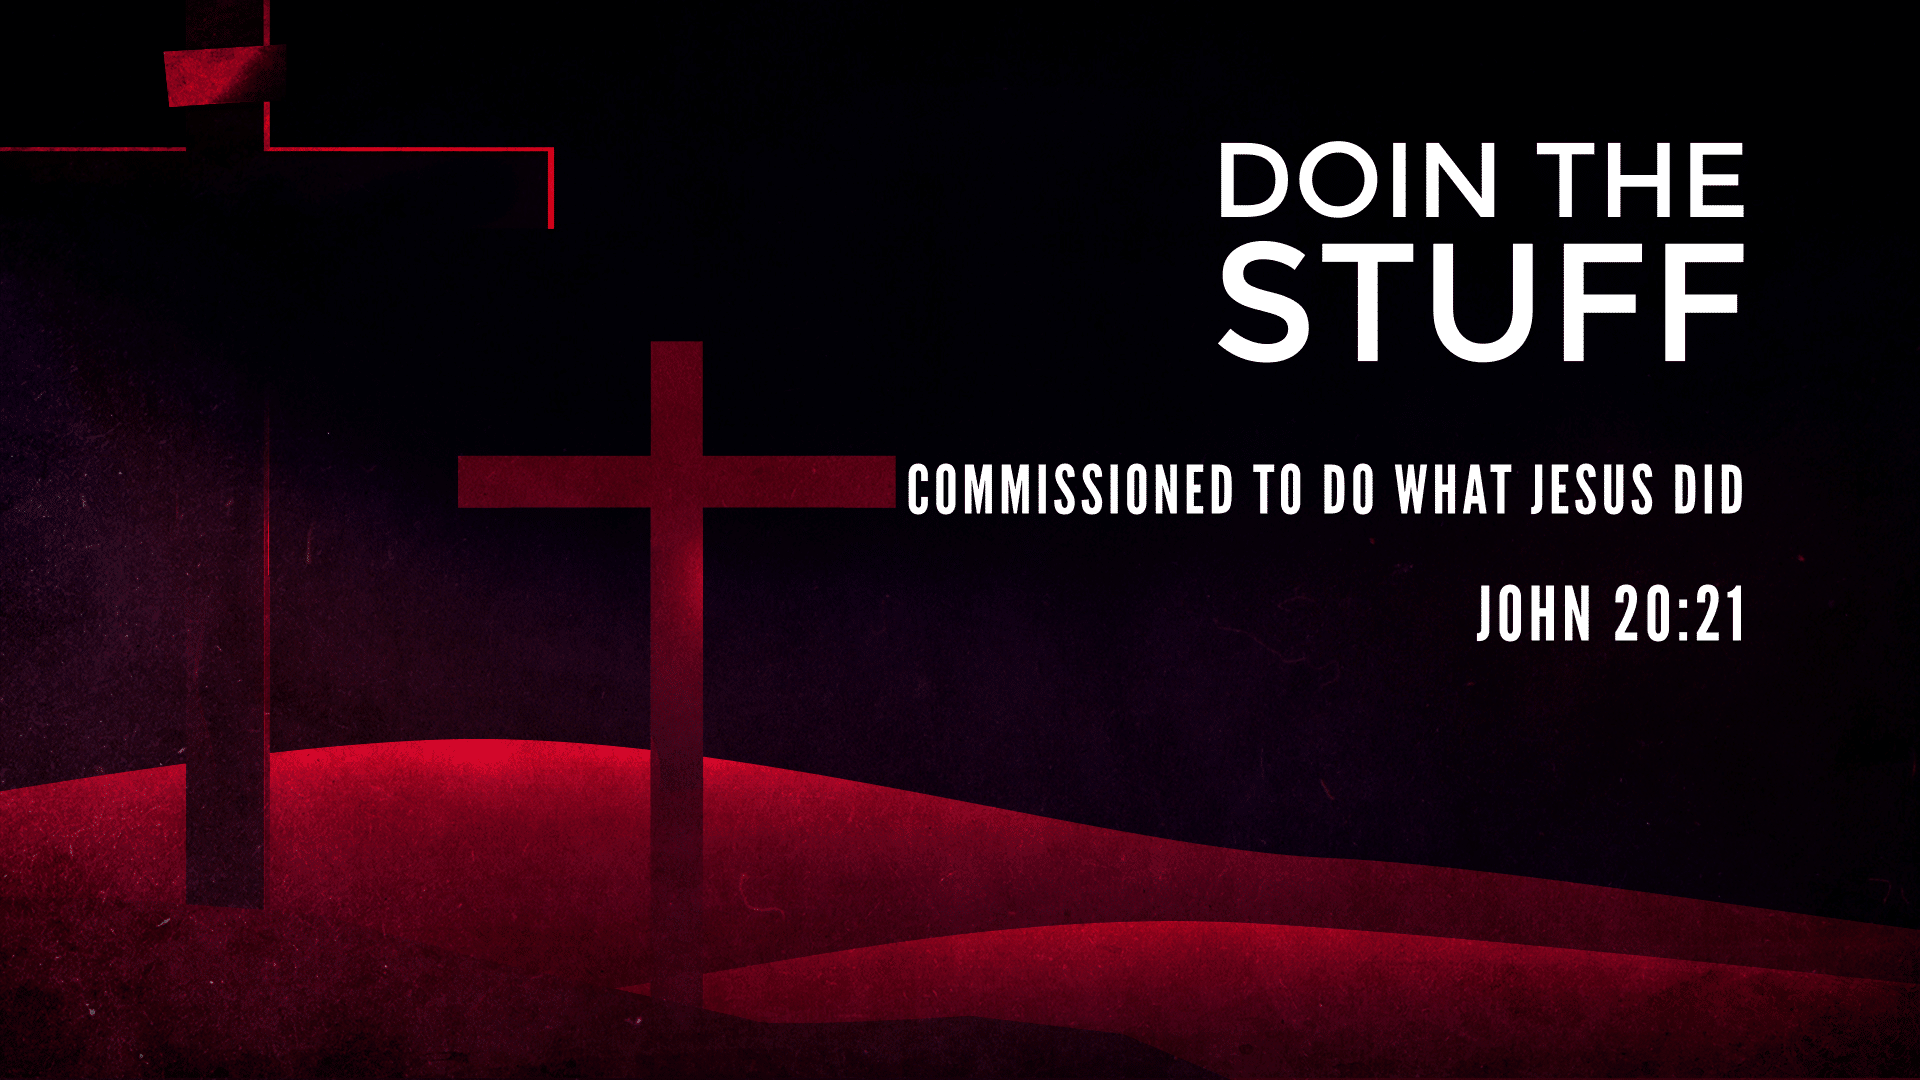 commissioned to do what Jesus did